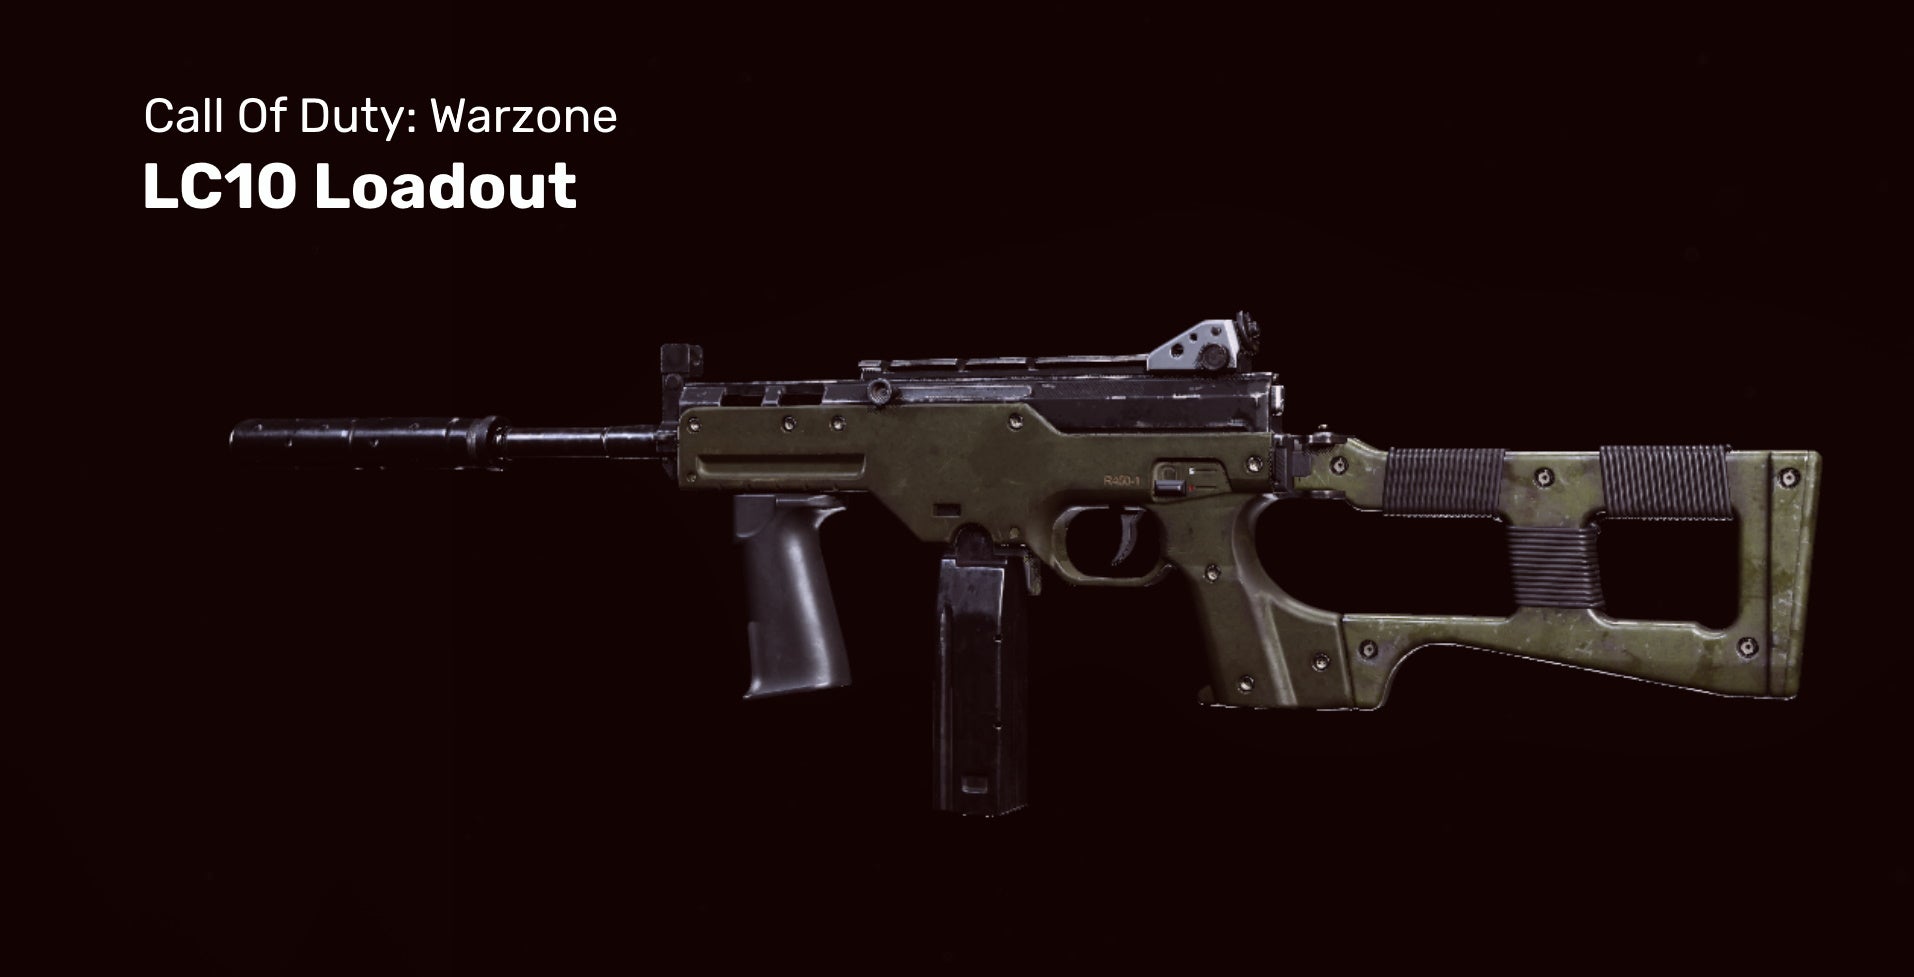 Warzone's LC10 gun on a black background.